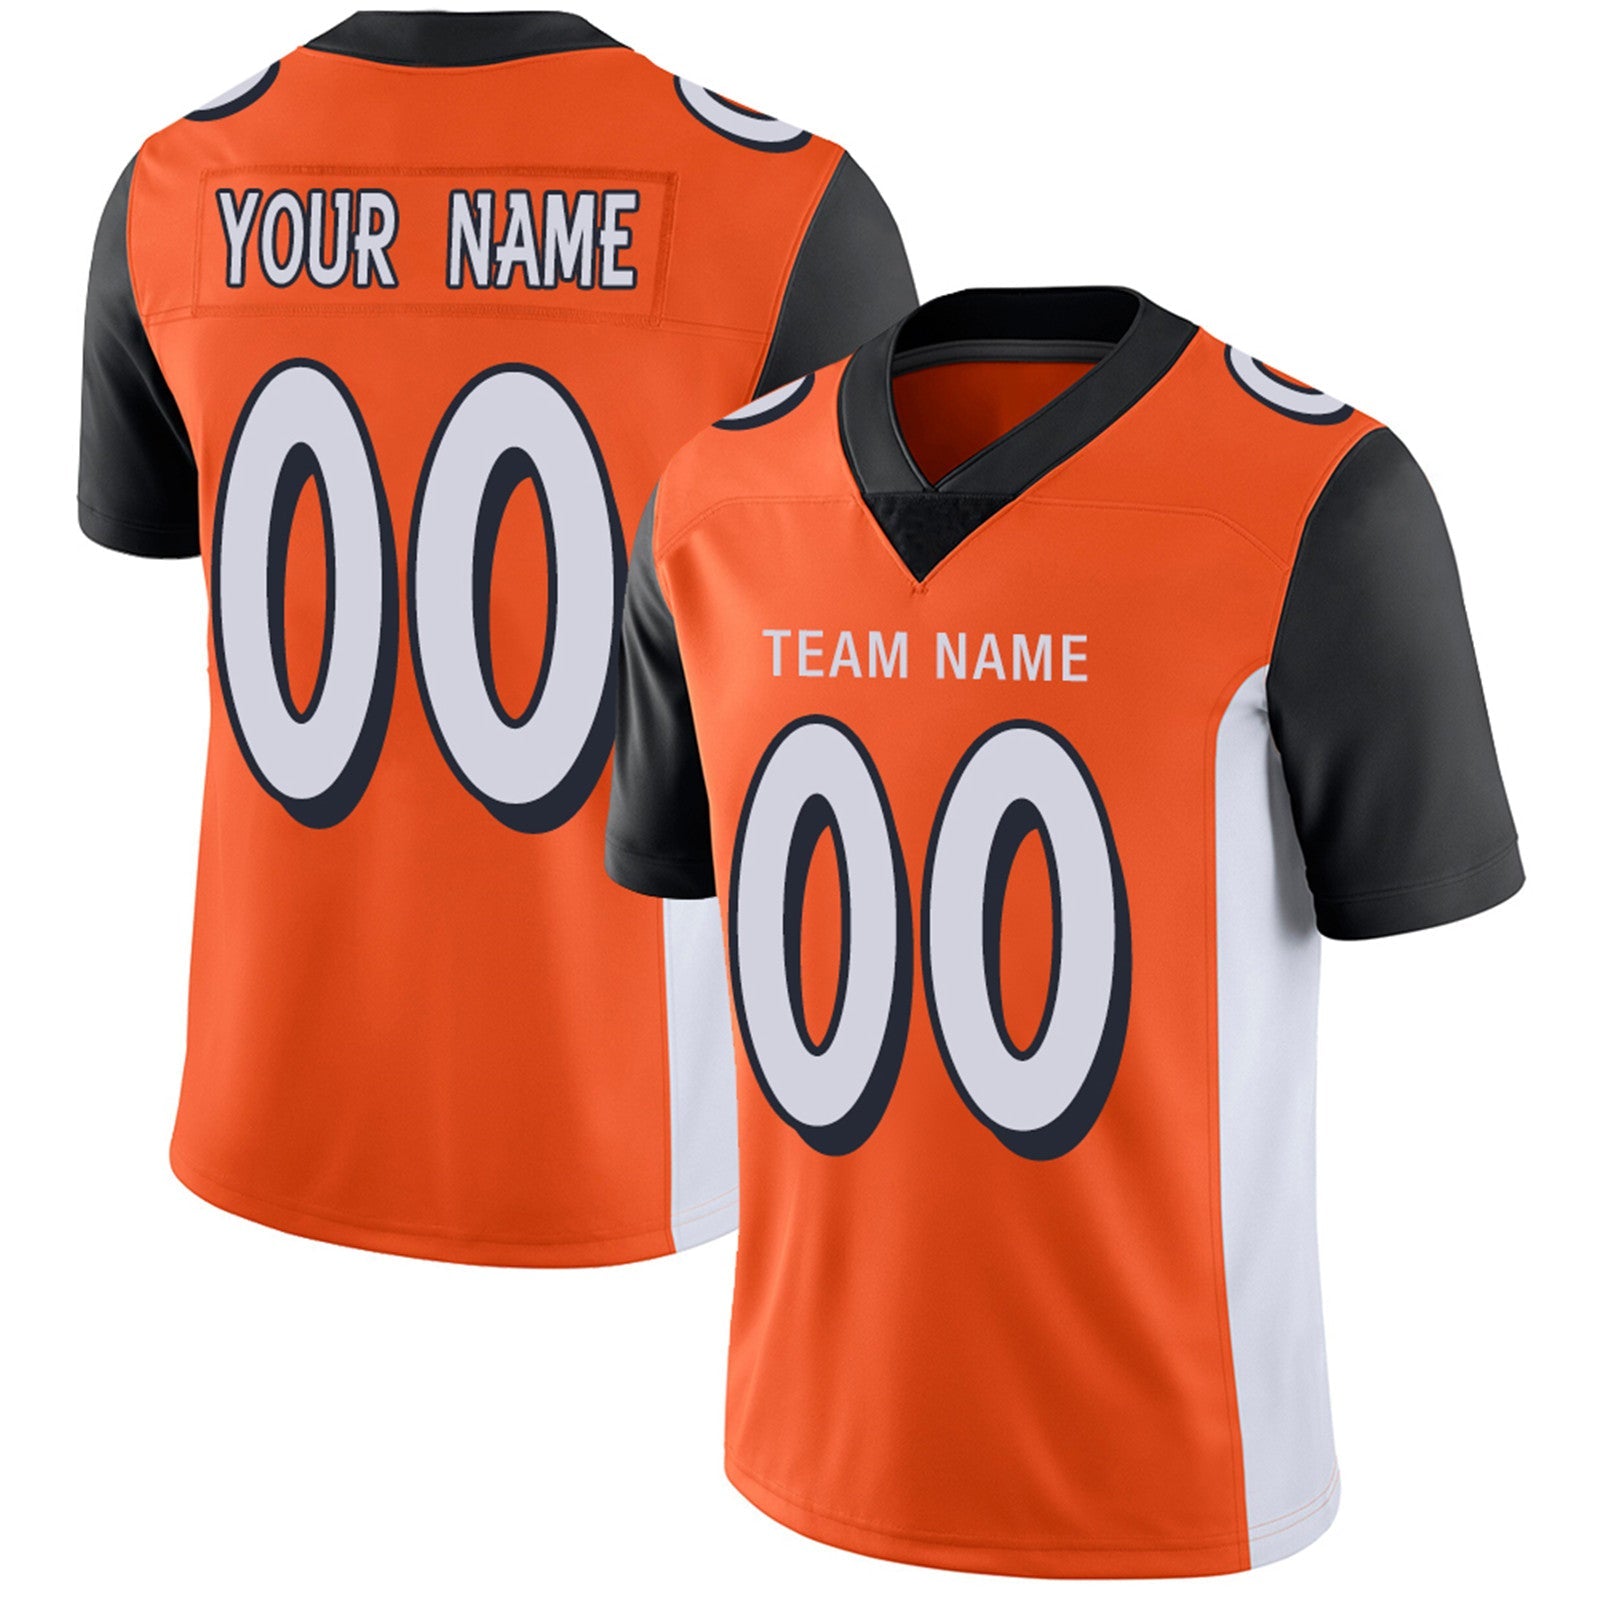 bengals jersey personalized